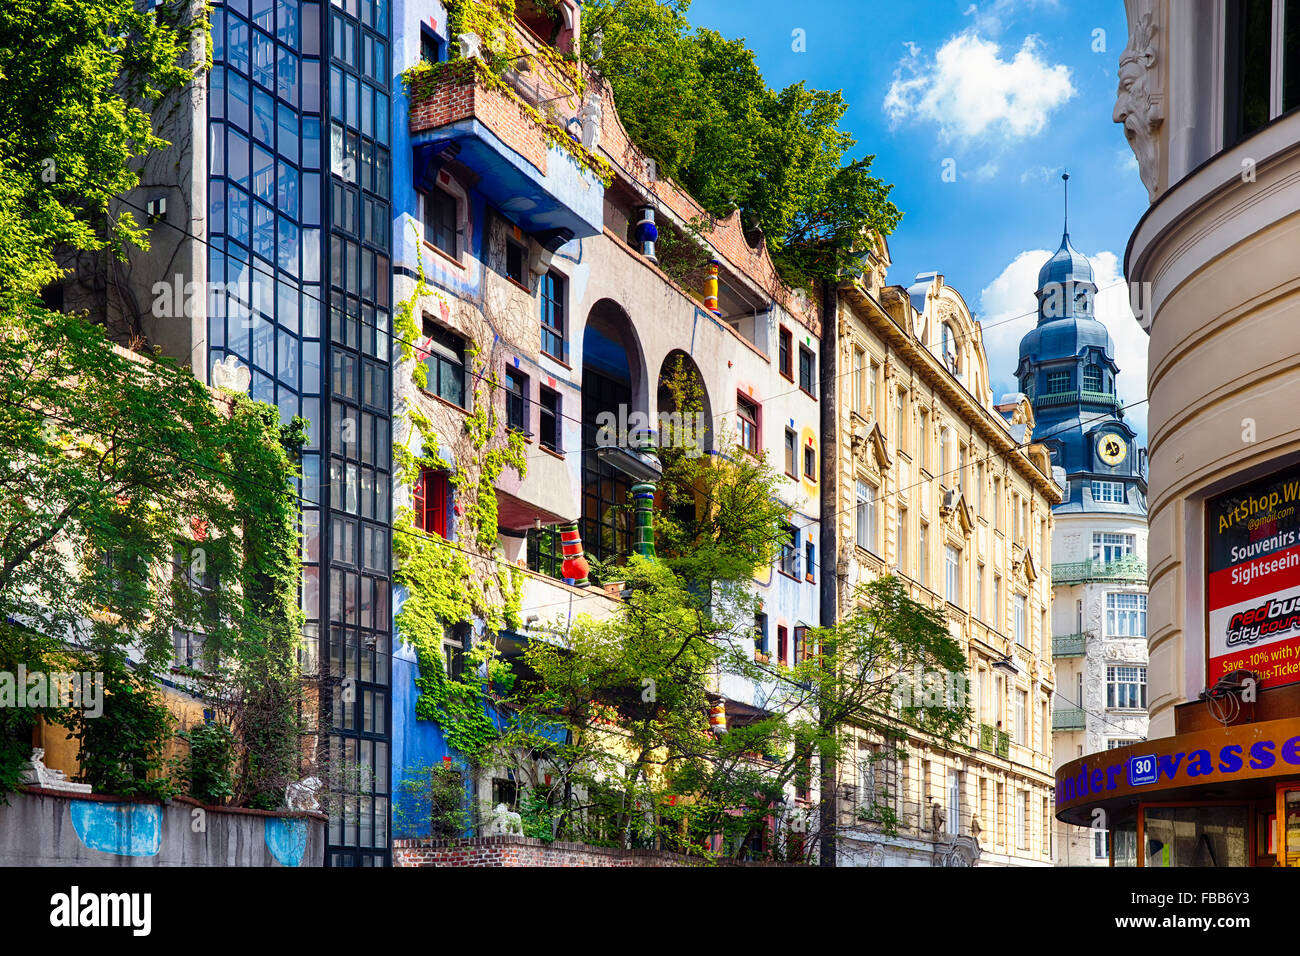 View of the Hundertwasser House Exterior from Lowengasse, Vienna, Austria Stock Photo